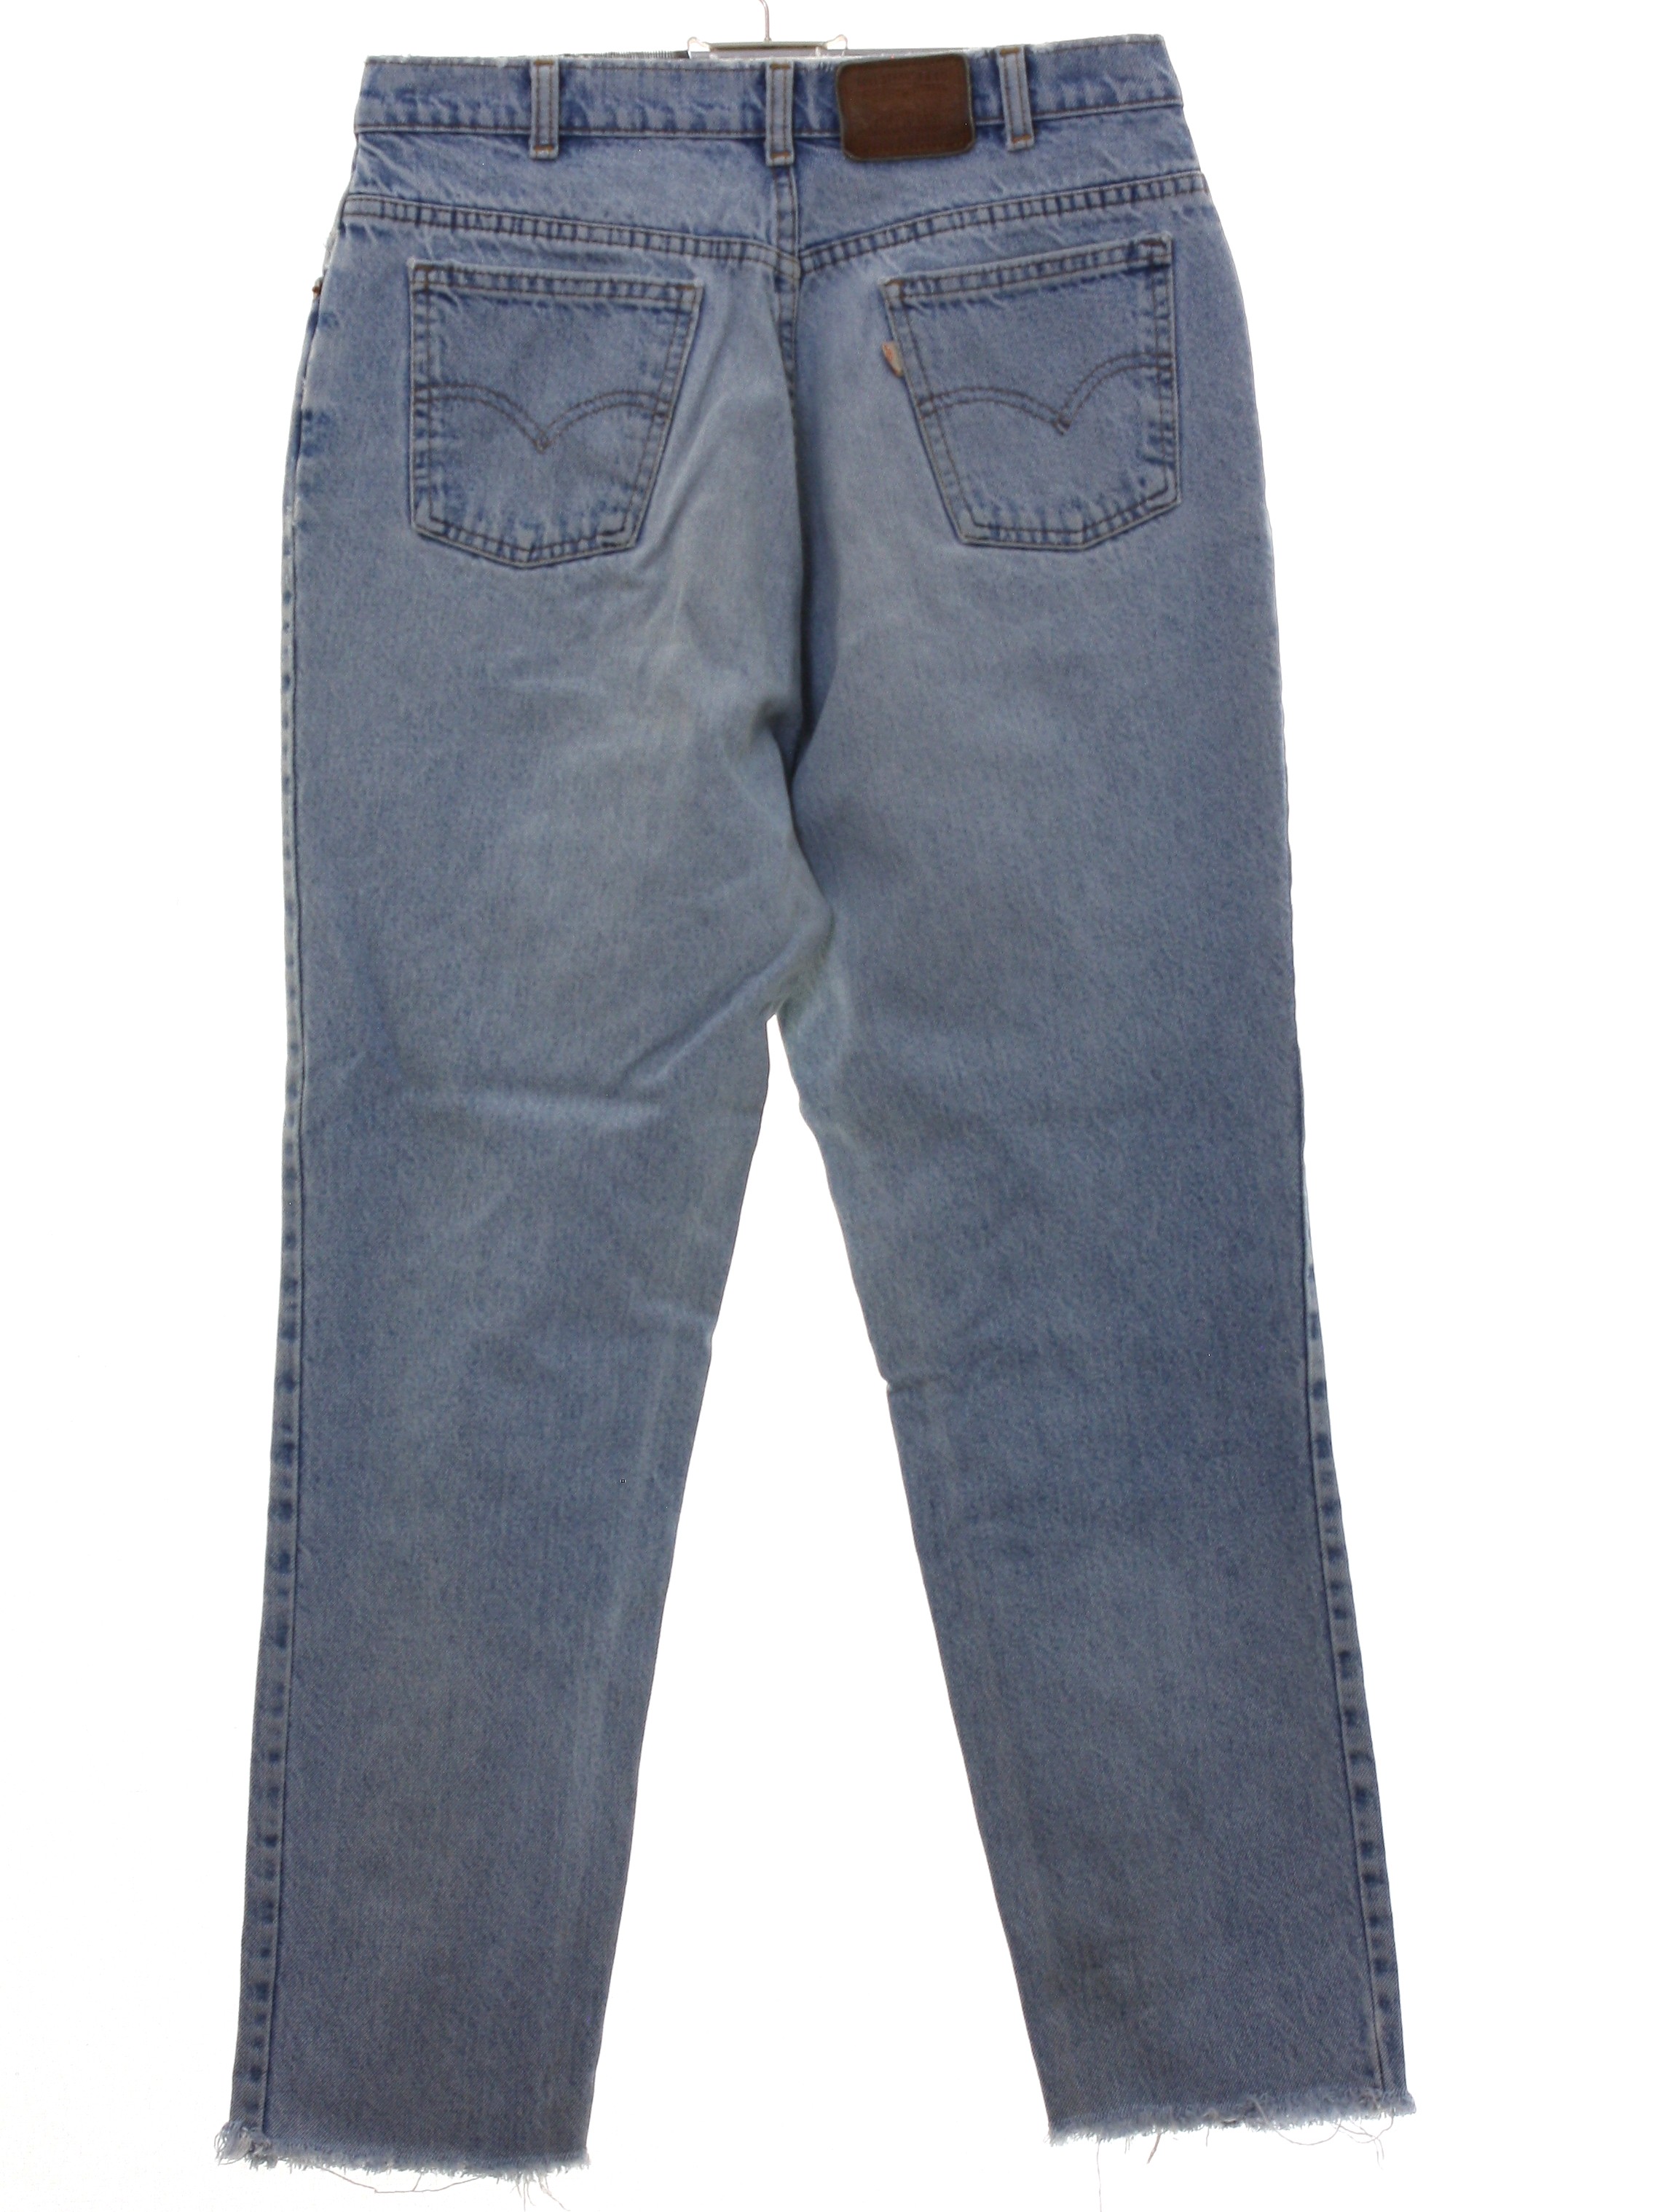 Retro Eighties Pants: 80s -Levis- Womens stone washed heavily faded and ...